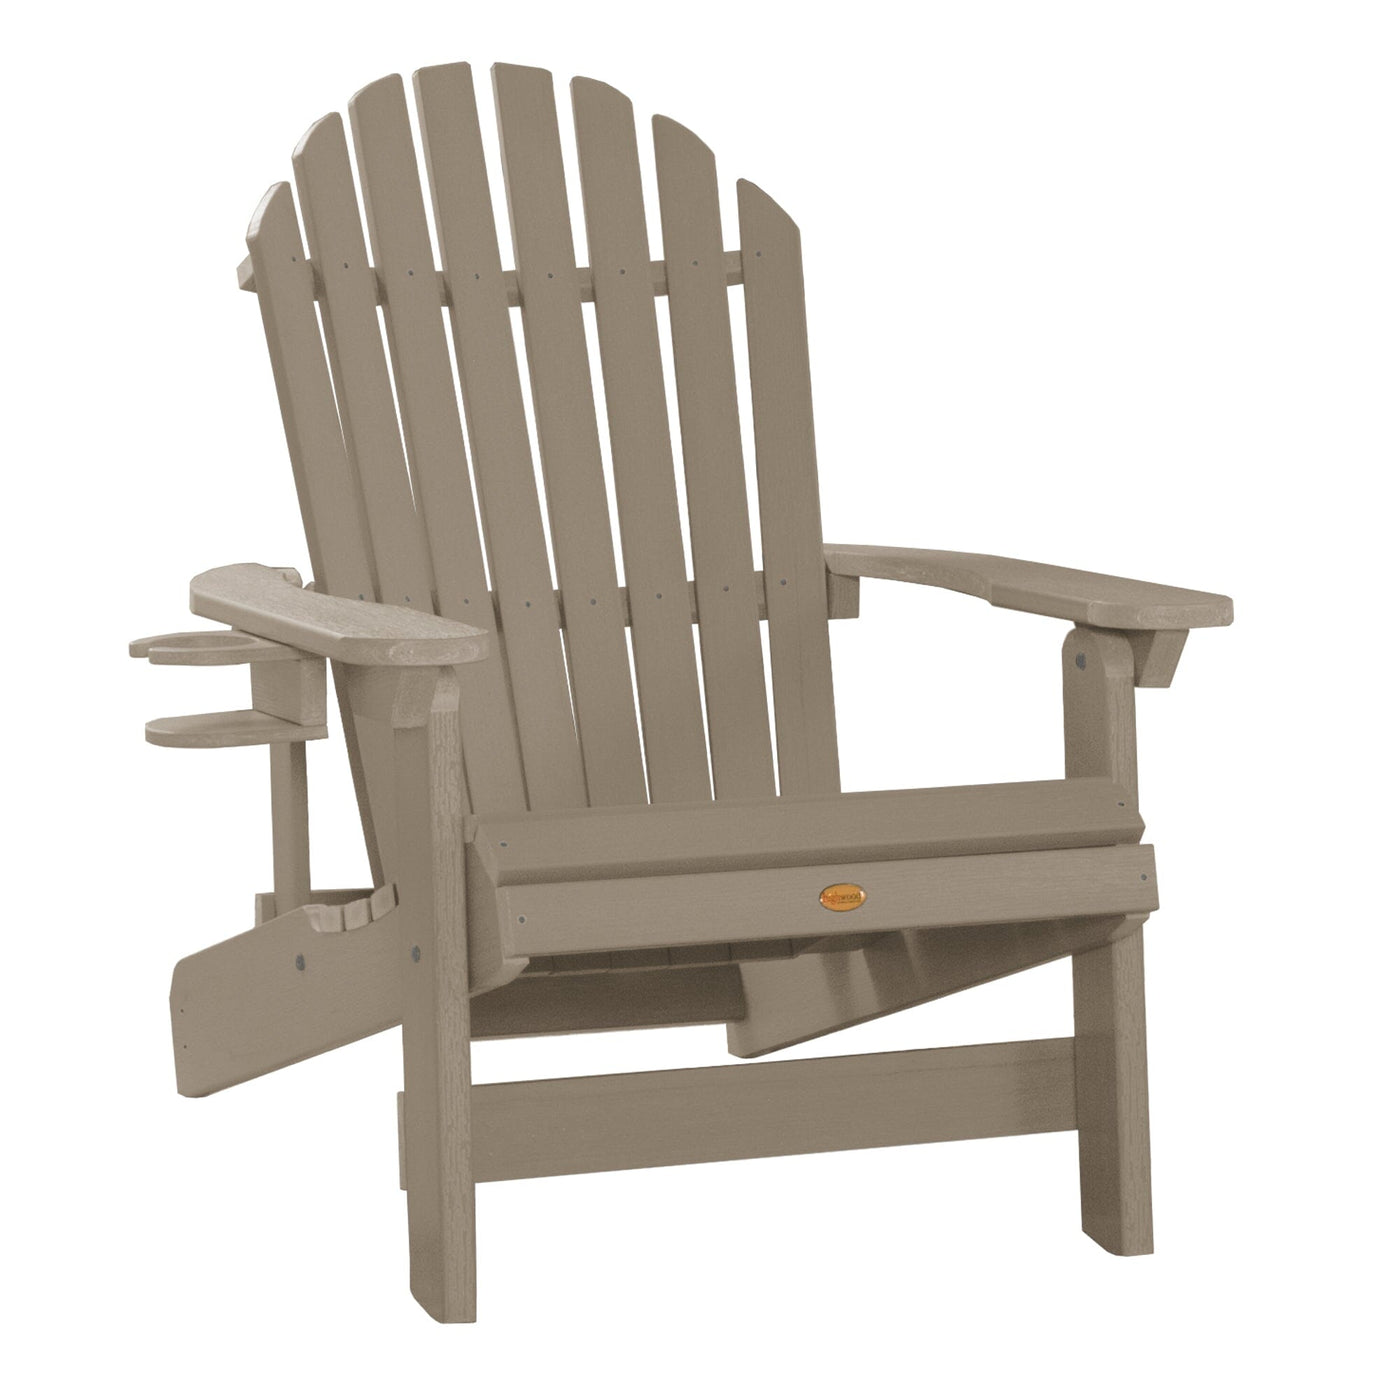 1 King Hamilton Folding and Reclining Adirondack Chair with 1 Easy-add Cup Holder Adirondack Chairs Highwood USA Woodland Brown 